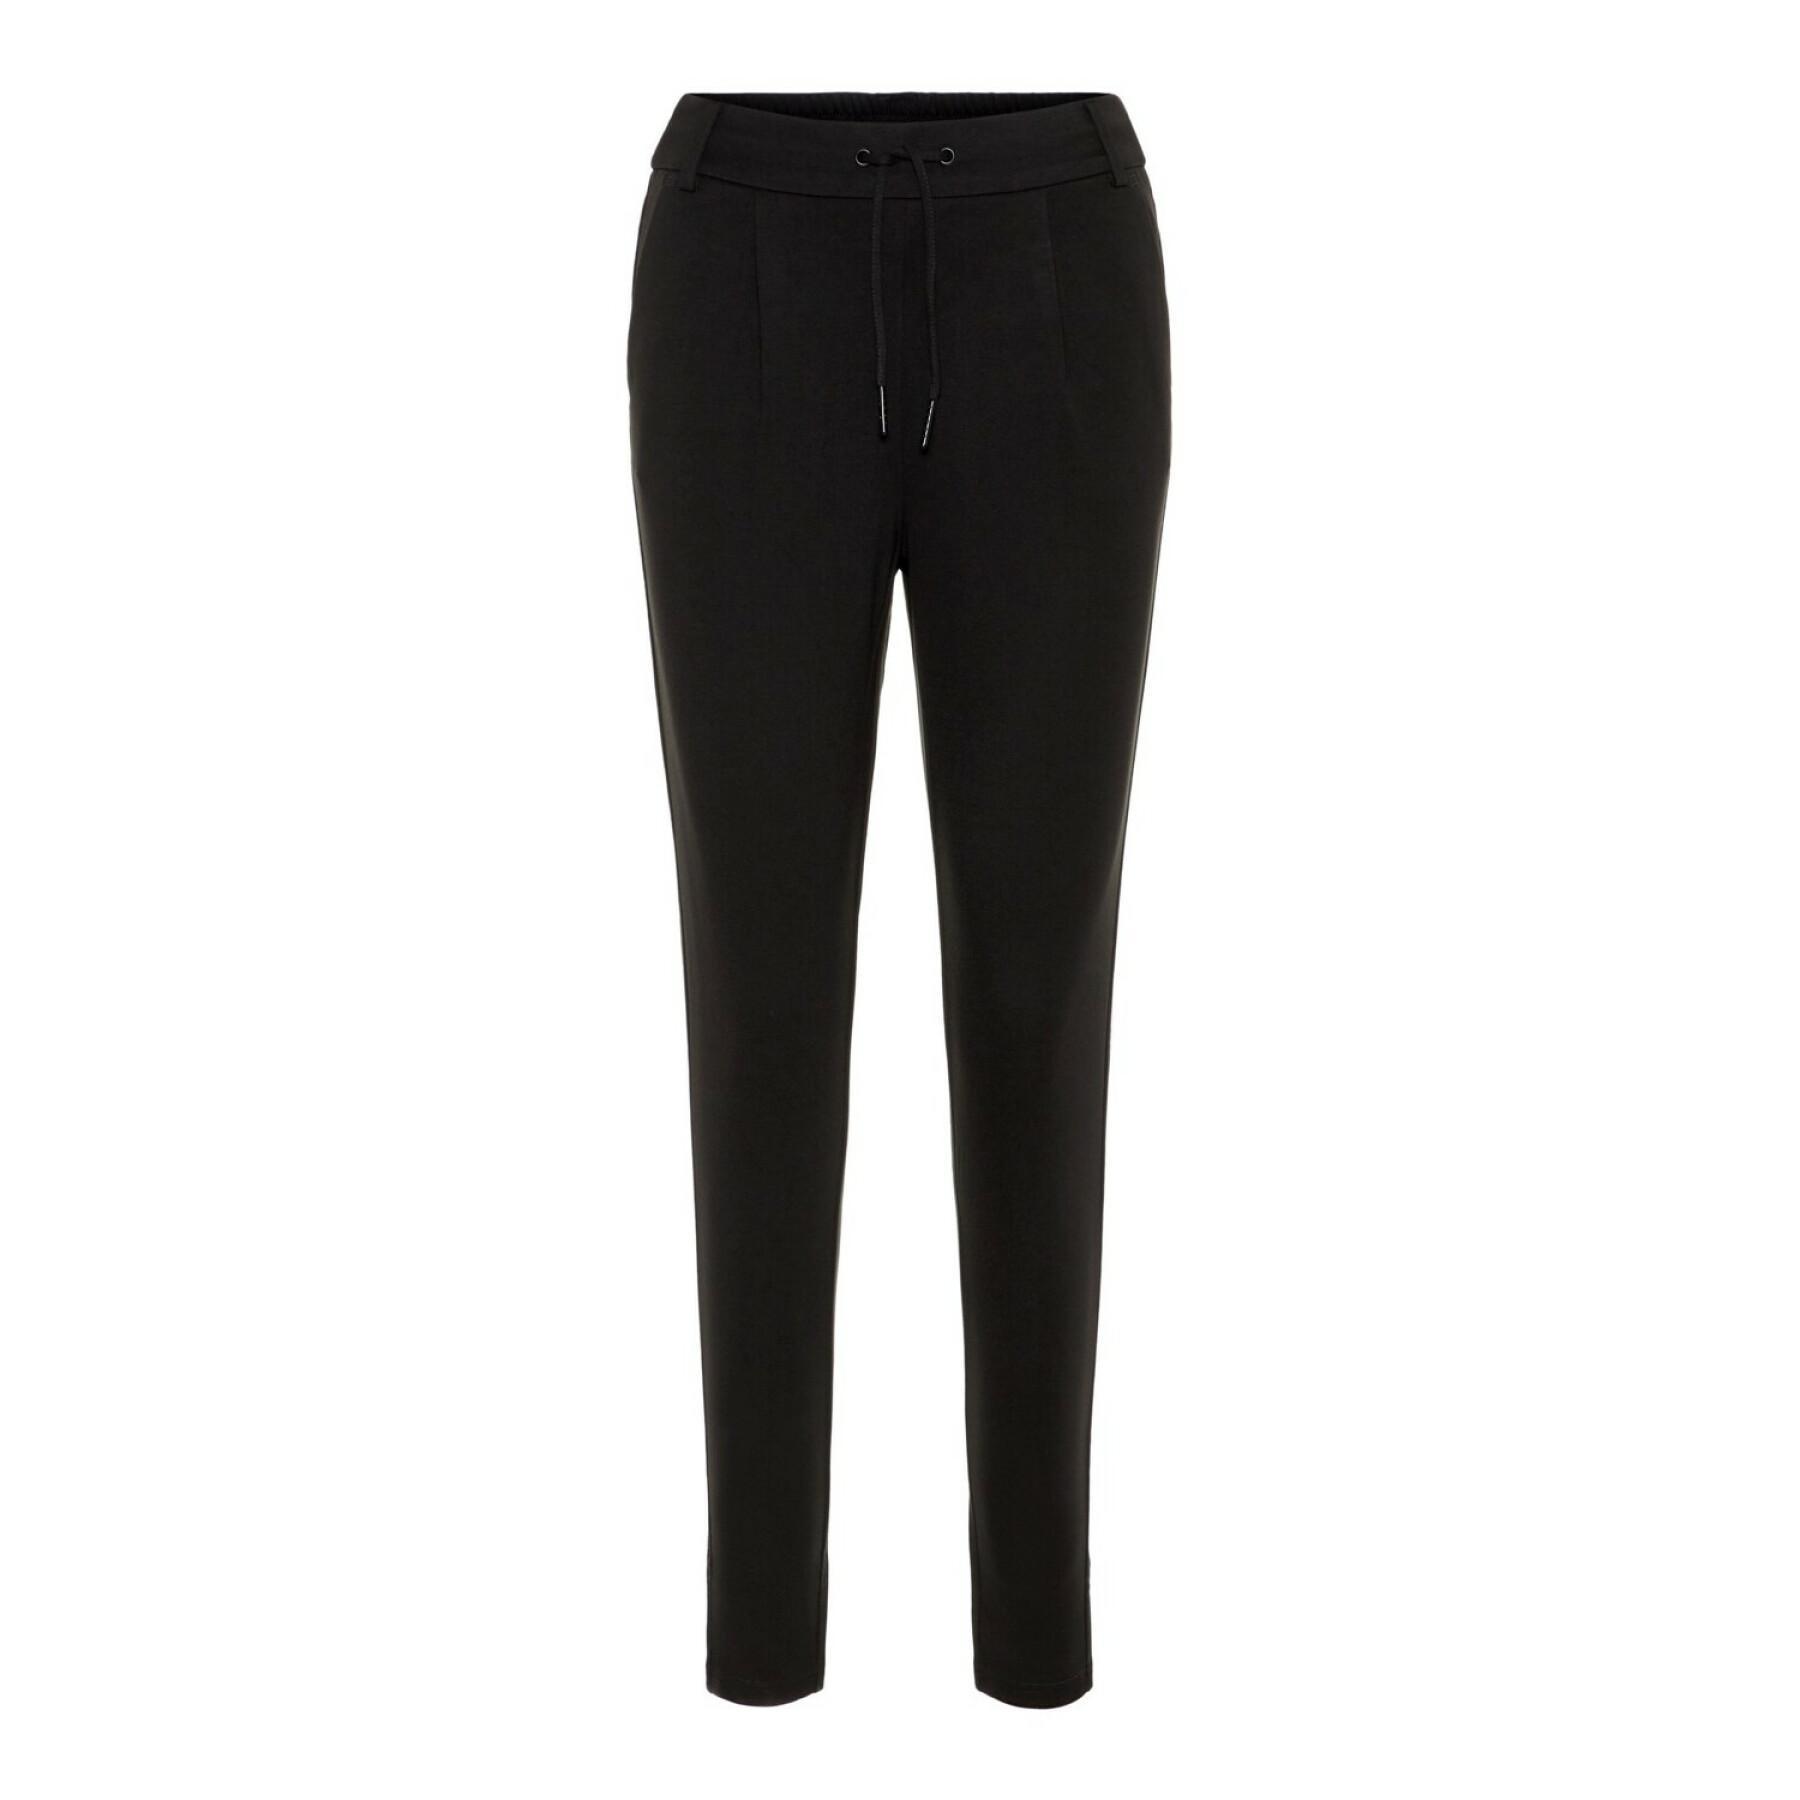 Women's trousers Noisy May nmpower